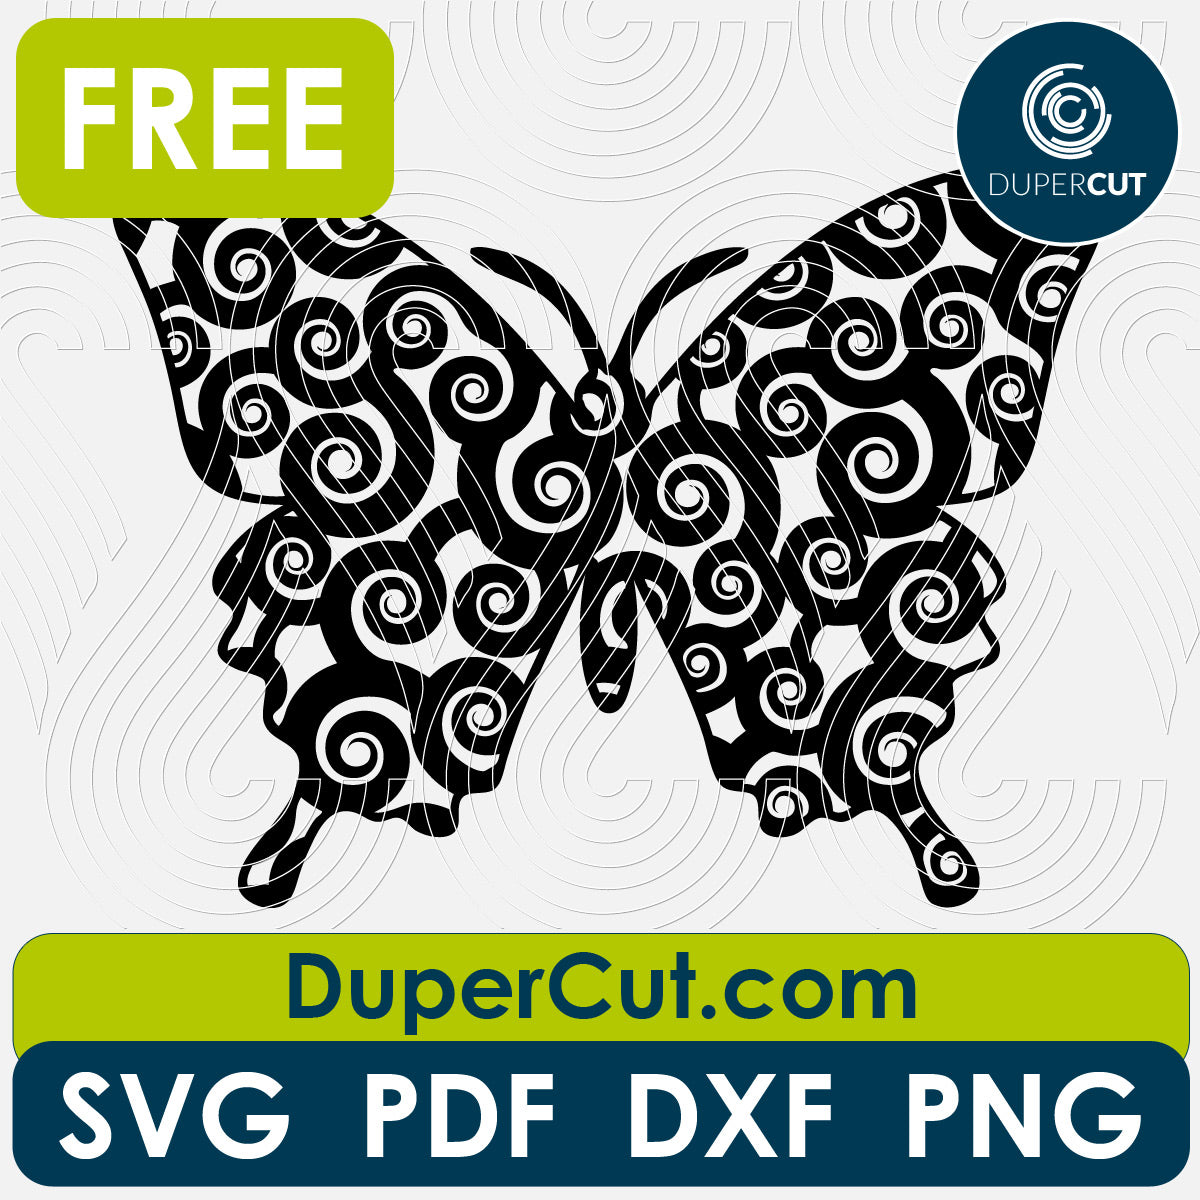 Butterfly curly pattern, FREE cutting template SVG PNG DXF files for Glowforge, Cricut, Silhouette, CNC laser router by DuperCut.com